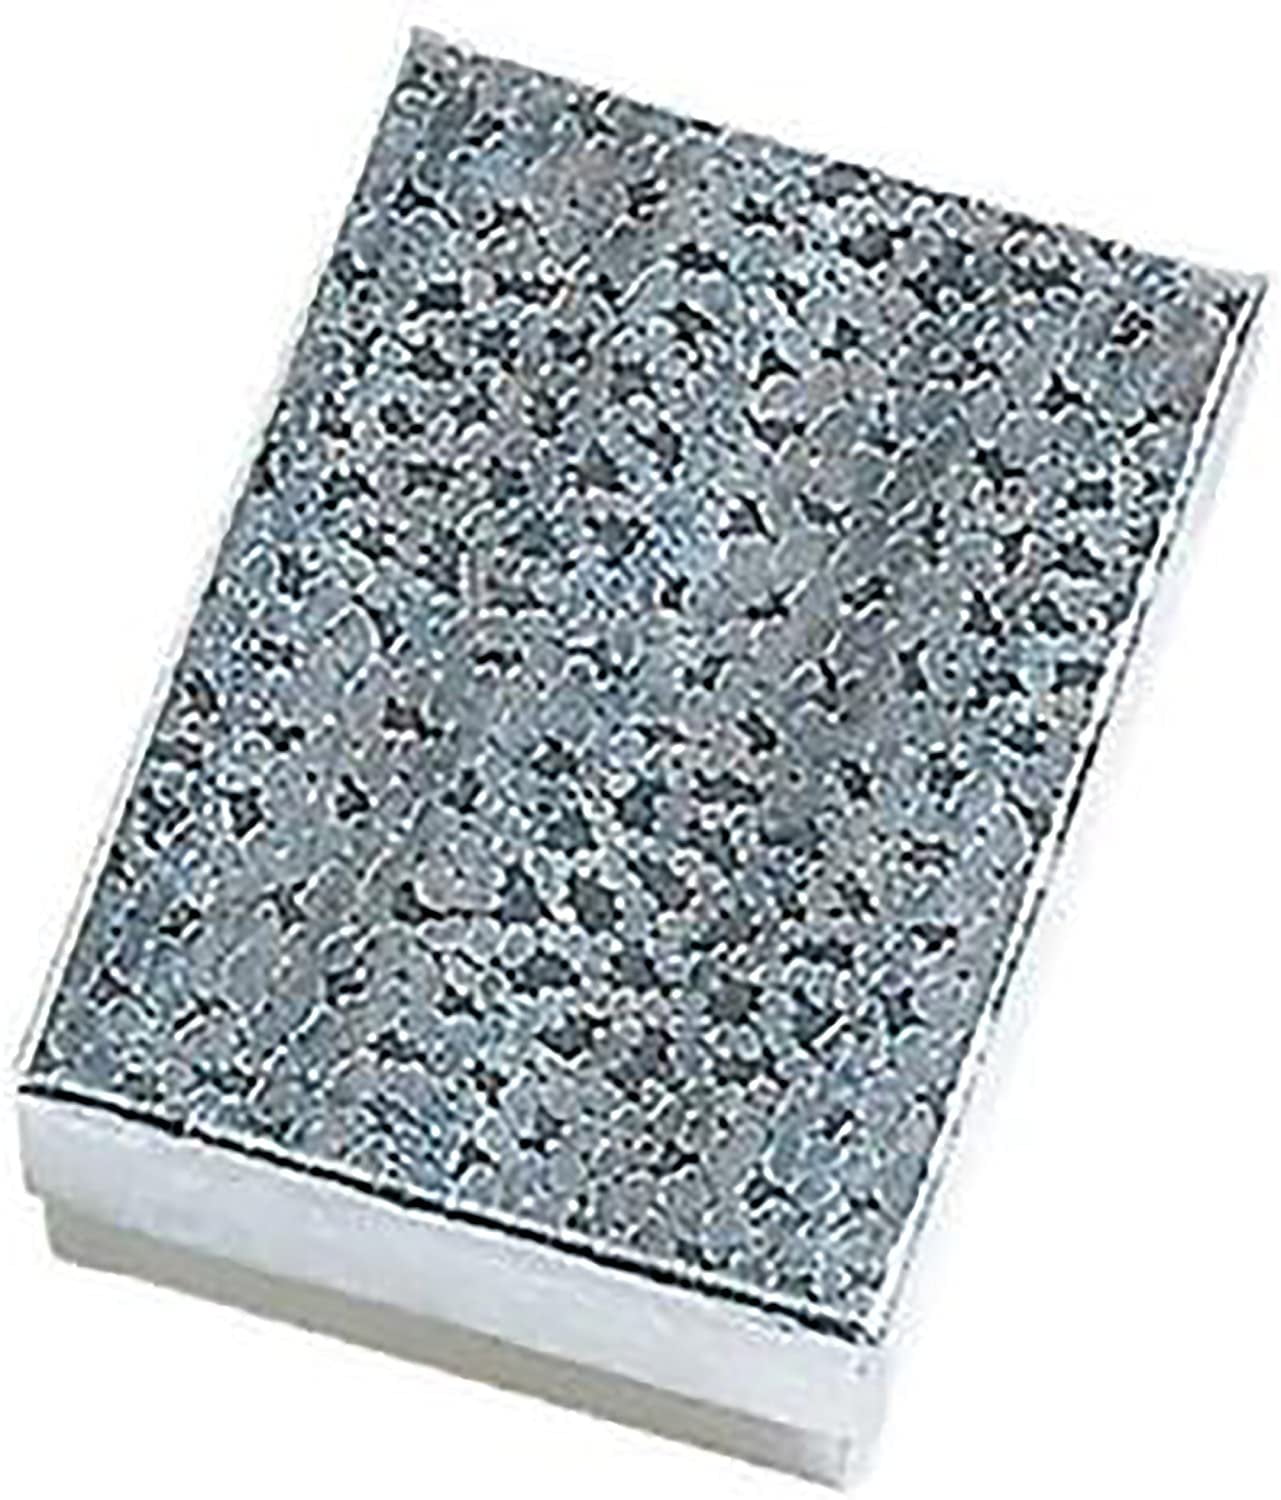 100 Cotton Filled Jewelry Gift Boxes Silver Foil Covered 2 5/8" x 1 1/2" x1" 